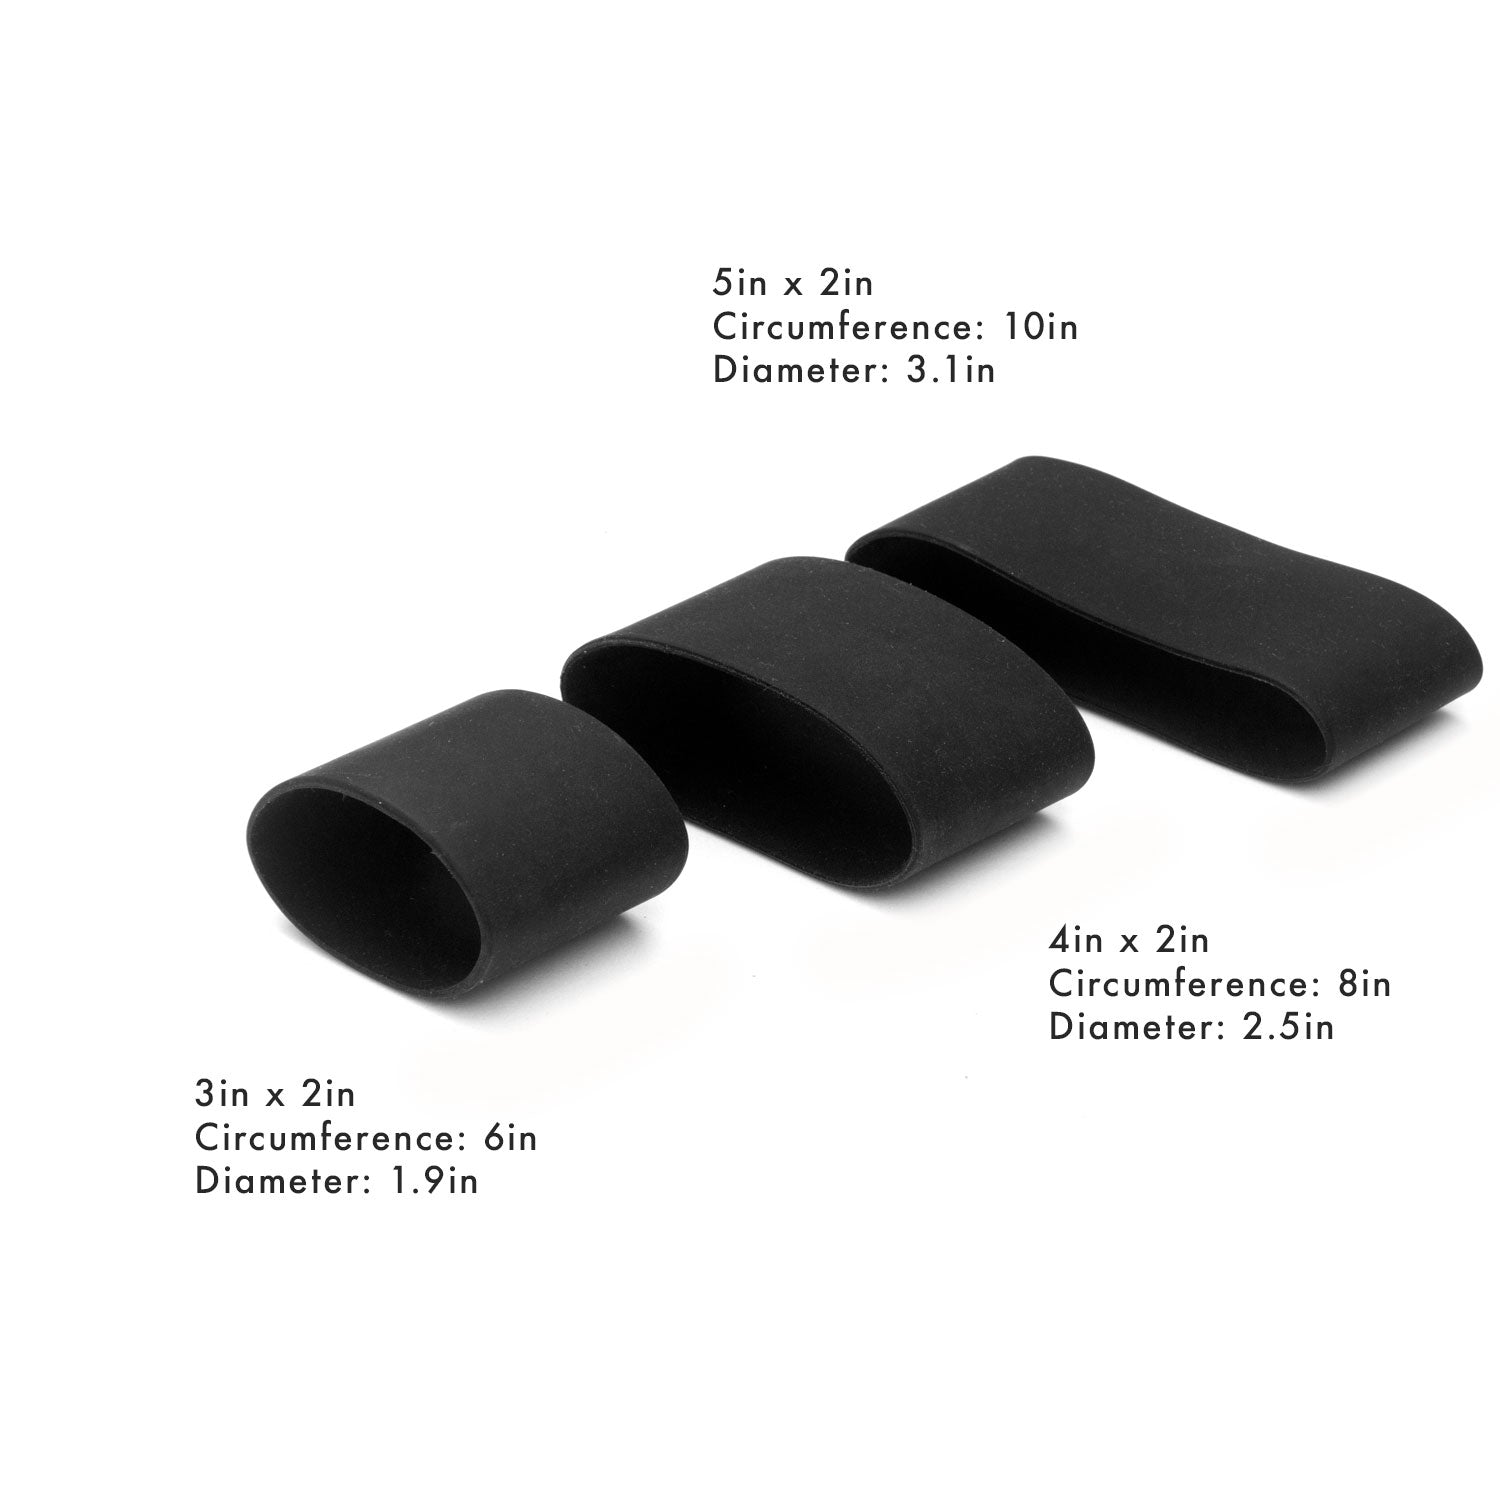 Grifiti Band Joes Silicone Grip Bands 3 Pack Assorted Sizes Mugs Cups  Bottles Knobs Dumbbells